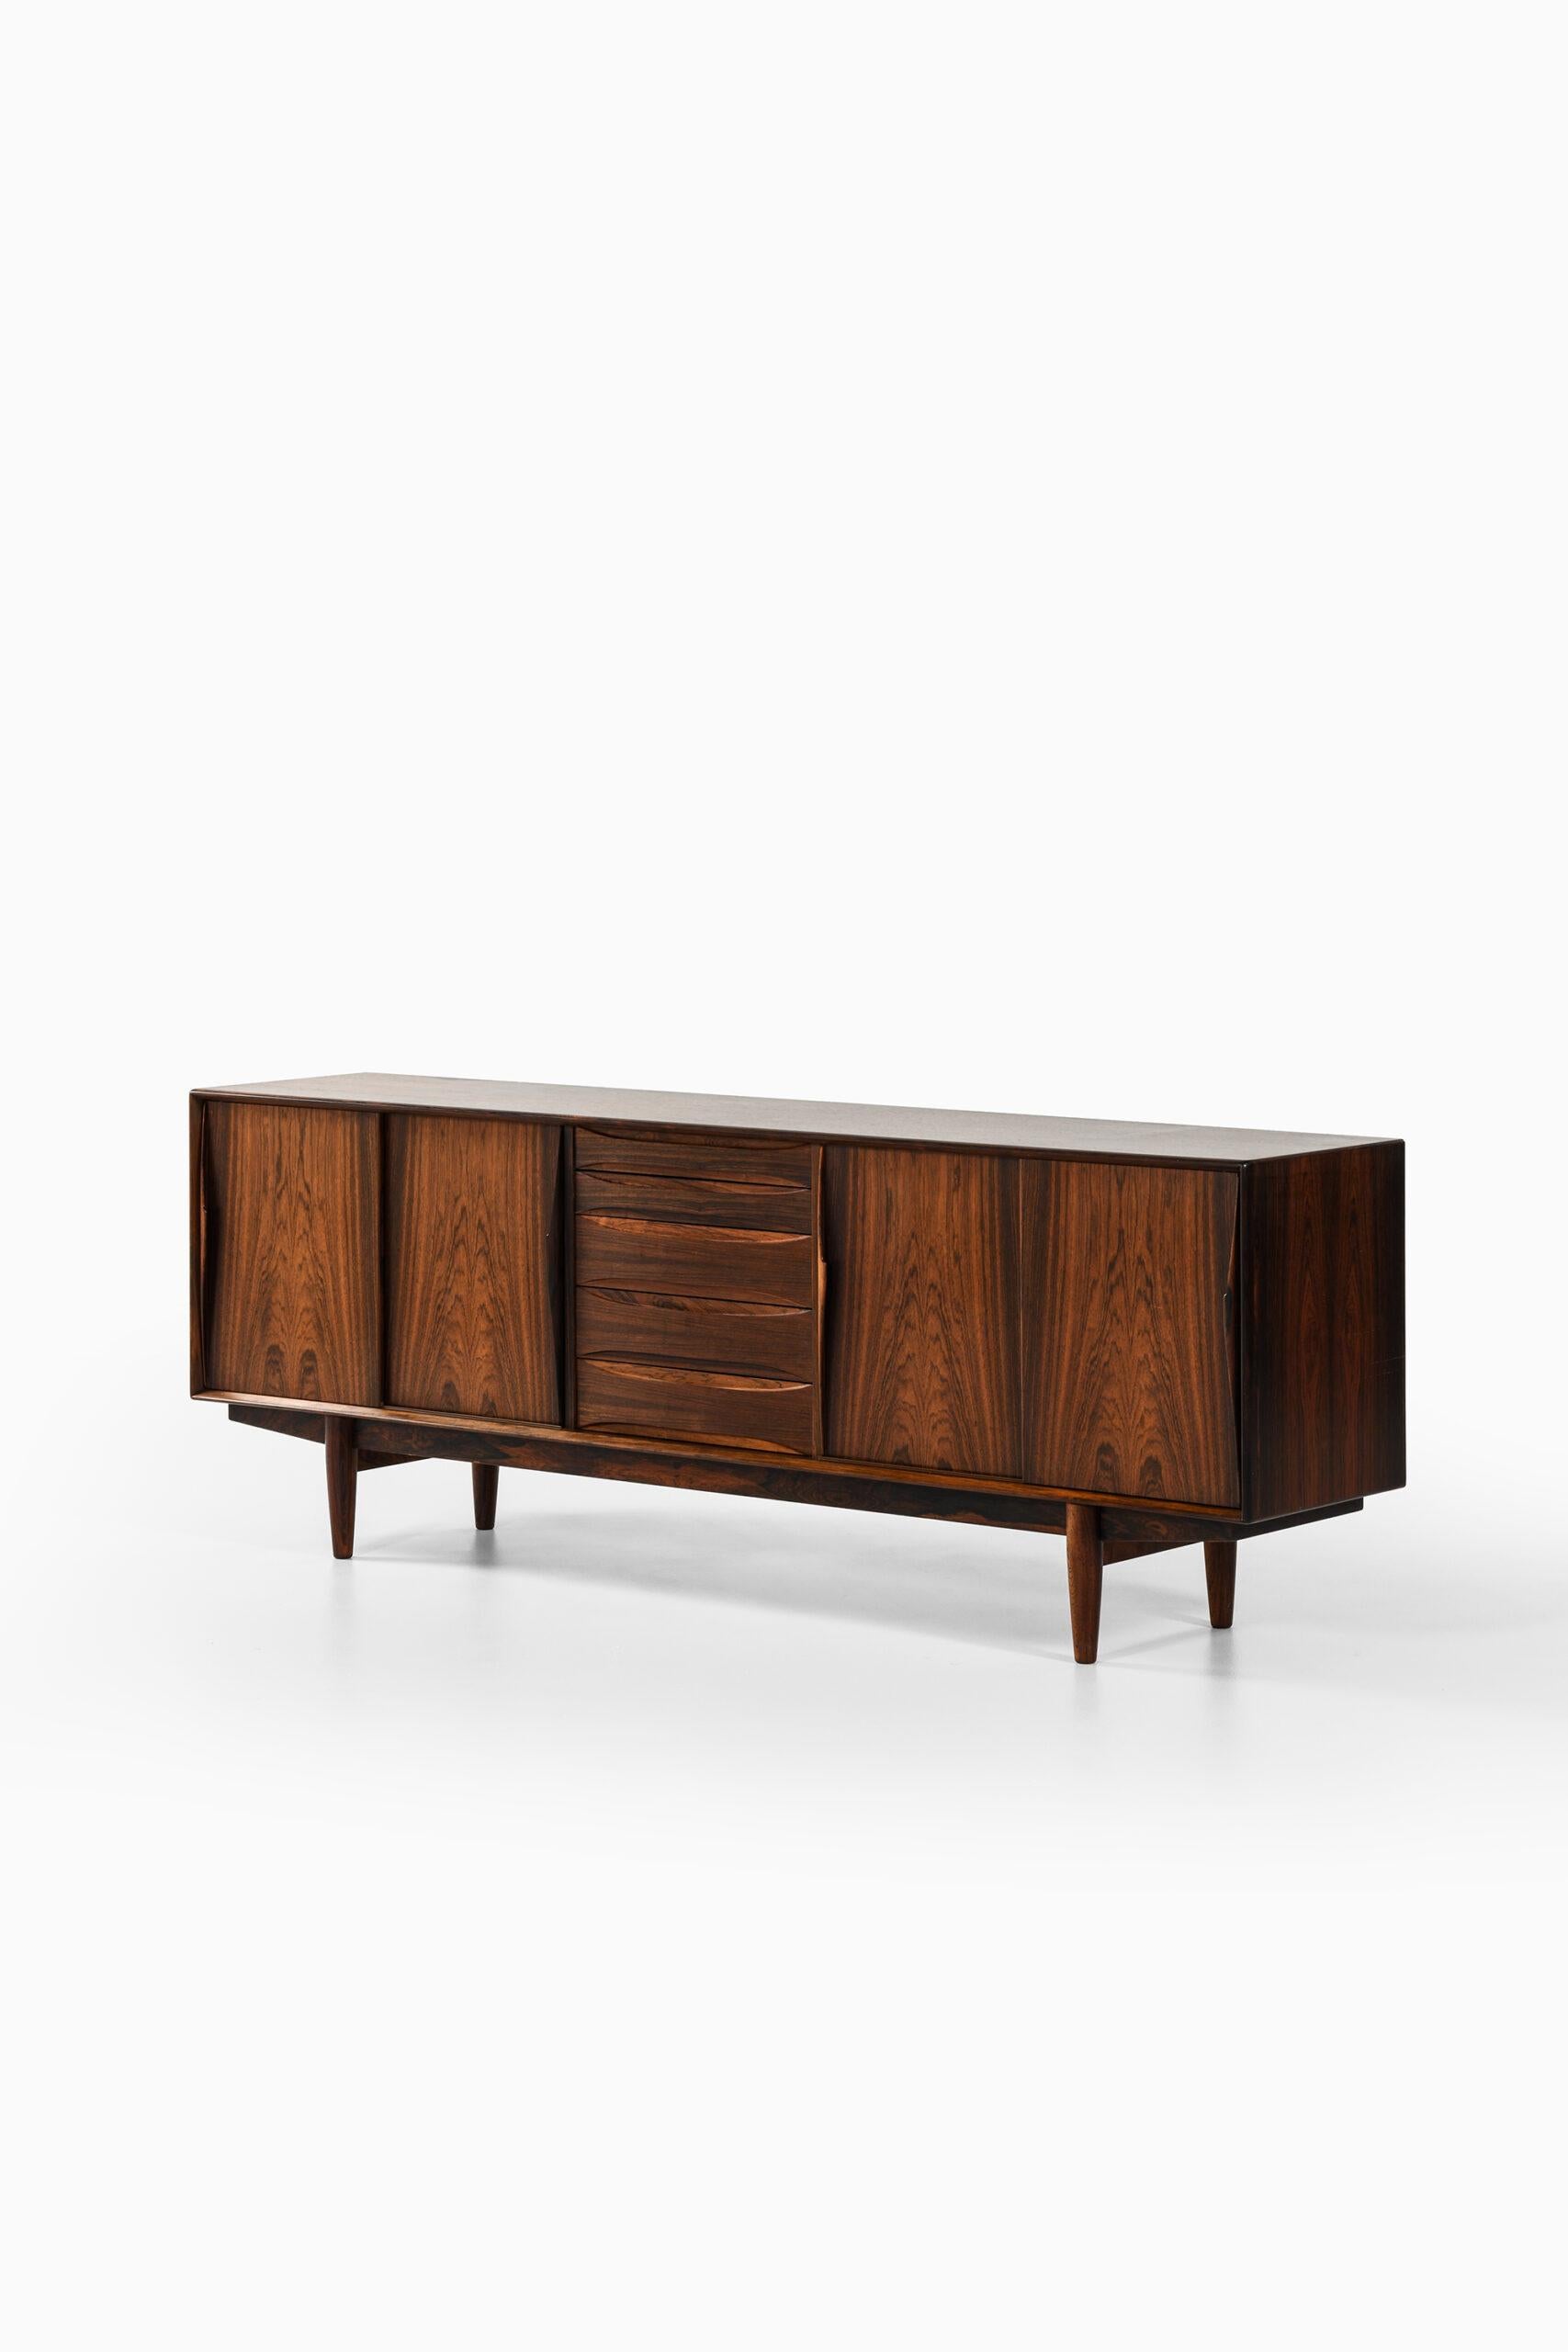 Mid-20th Century Sideboard Produced by Skovby Møbler For Sale